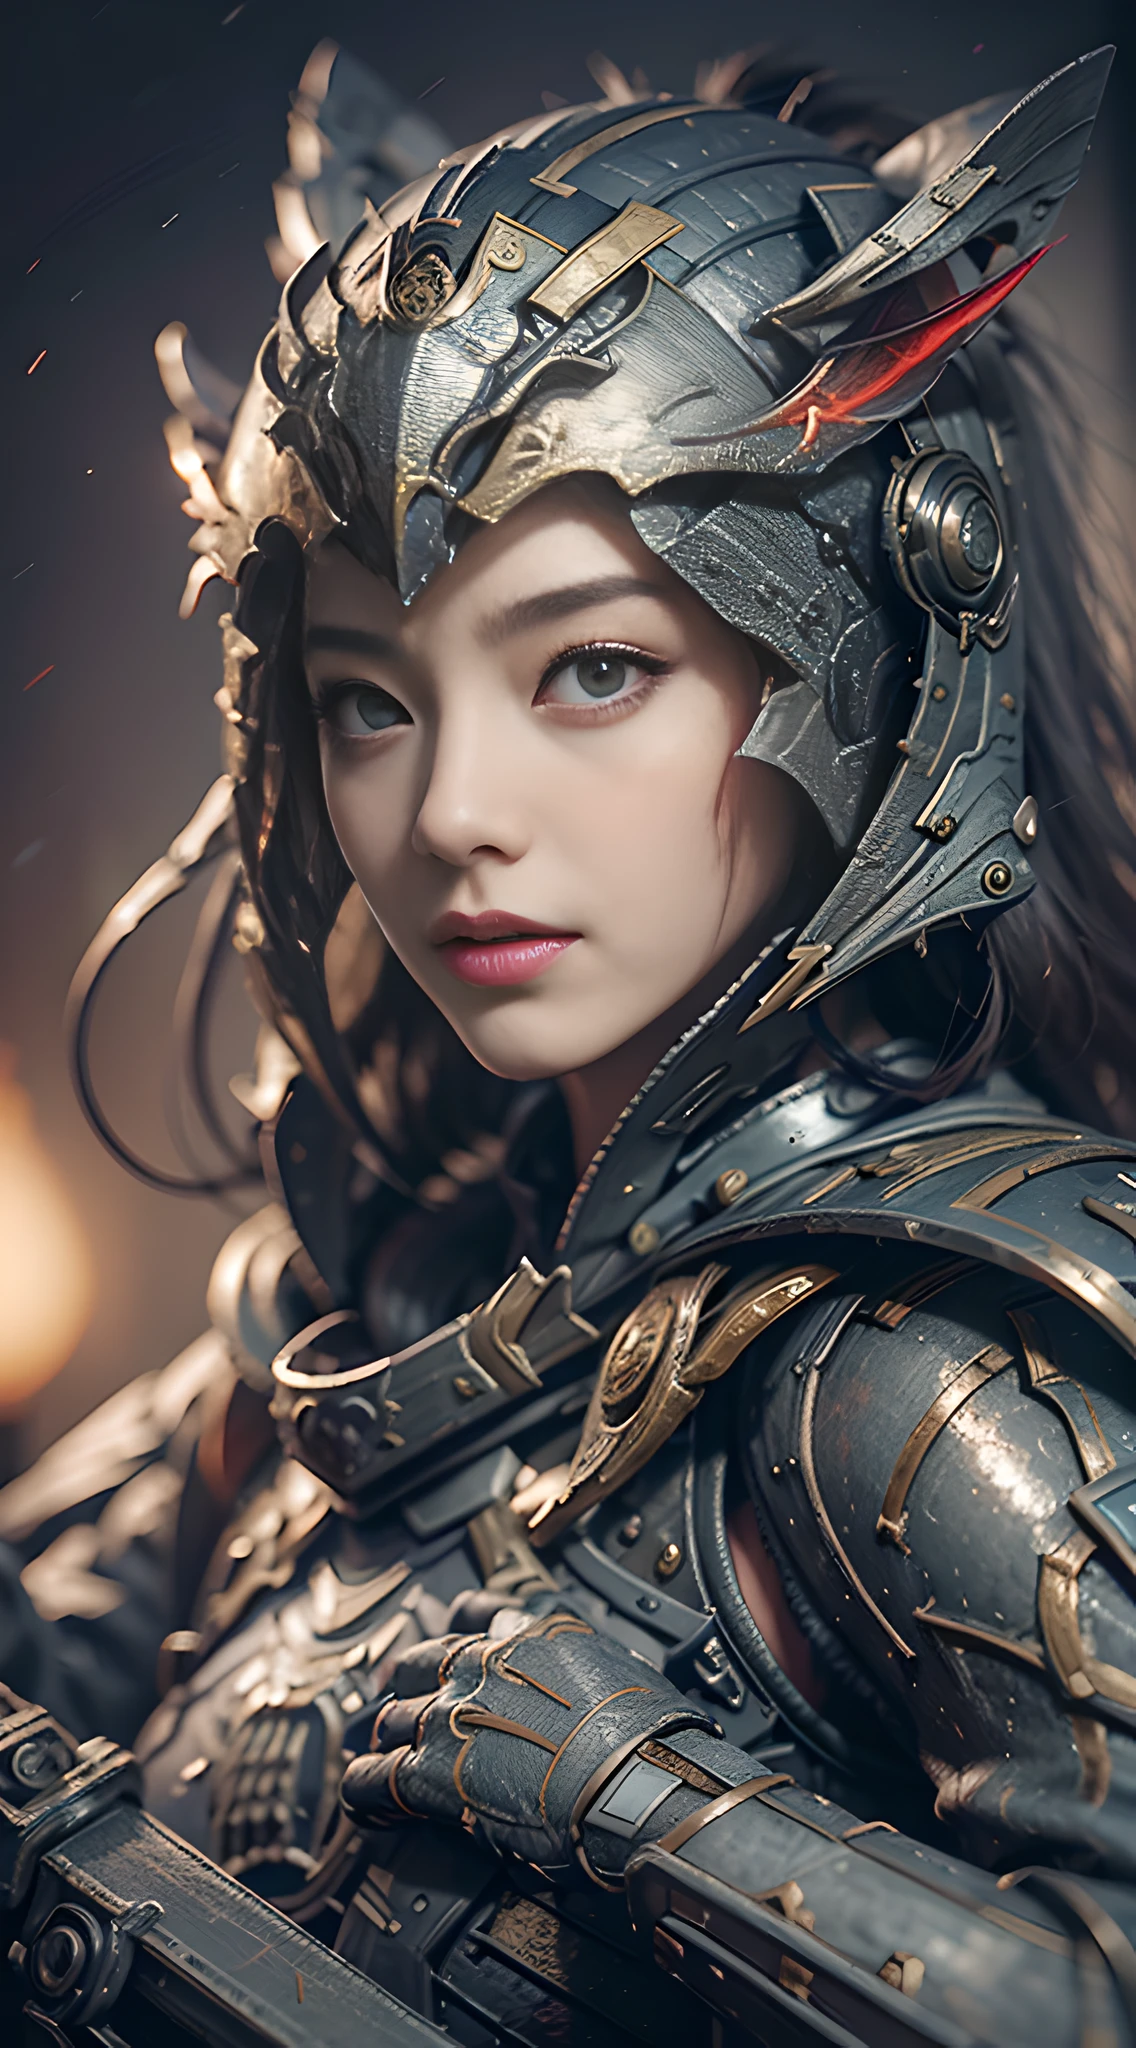 A Chinese Laughing Girl, Seven-Twin Shot, (Warframe: 1.2), (Cloak: 1.2), (Ancient Battlefield of the East: 1.2), (Weapon in Hand: 1.2), Vampire Fangs, Extreme Quality, Cg Unity 8k, Super Delicate, Background Bokeh, Full of Field Depth, HDR High Dynamics, Realistic Reduction, Intricacies, Extreme Details, Perfect Presentation of Midjourney Art Style. realistic, elegant, goddess, surrealism, high detail, supremacy, cinematic lighting, ray tracing, shadow, uhd, retina, masterpiece, ccurate, anatomically correct, textured skin, super detail, high detail, high quality, high quality, award-winning, best quality, high resolution, 1080P, 16k, 8k, 4K, HD